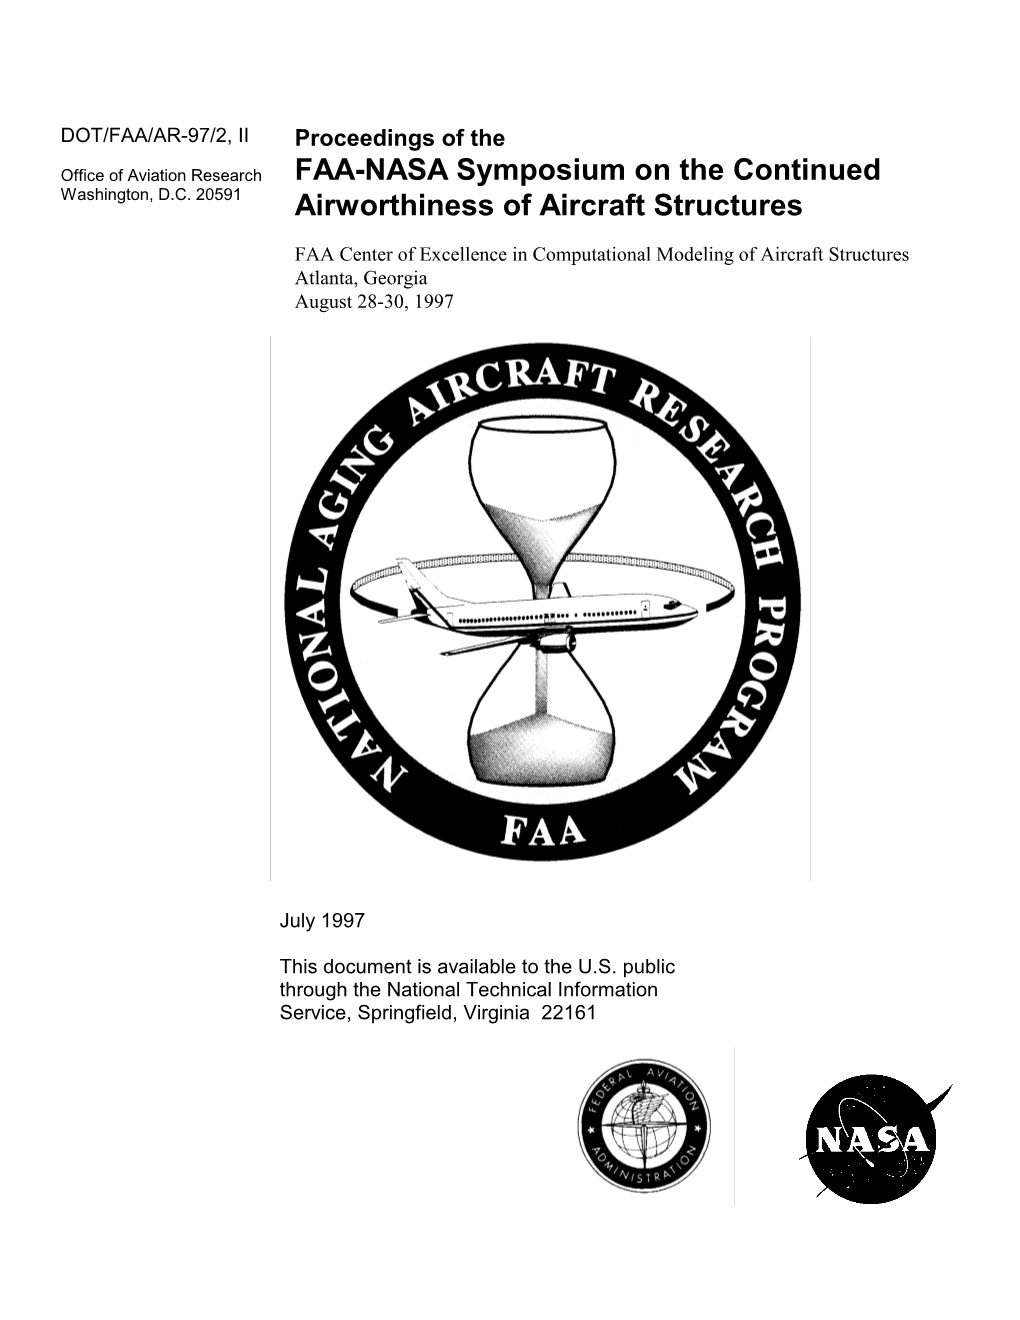 Faa-Nasa Symposium on the Continued Airworthiness of Aircraft Structures 6